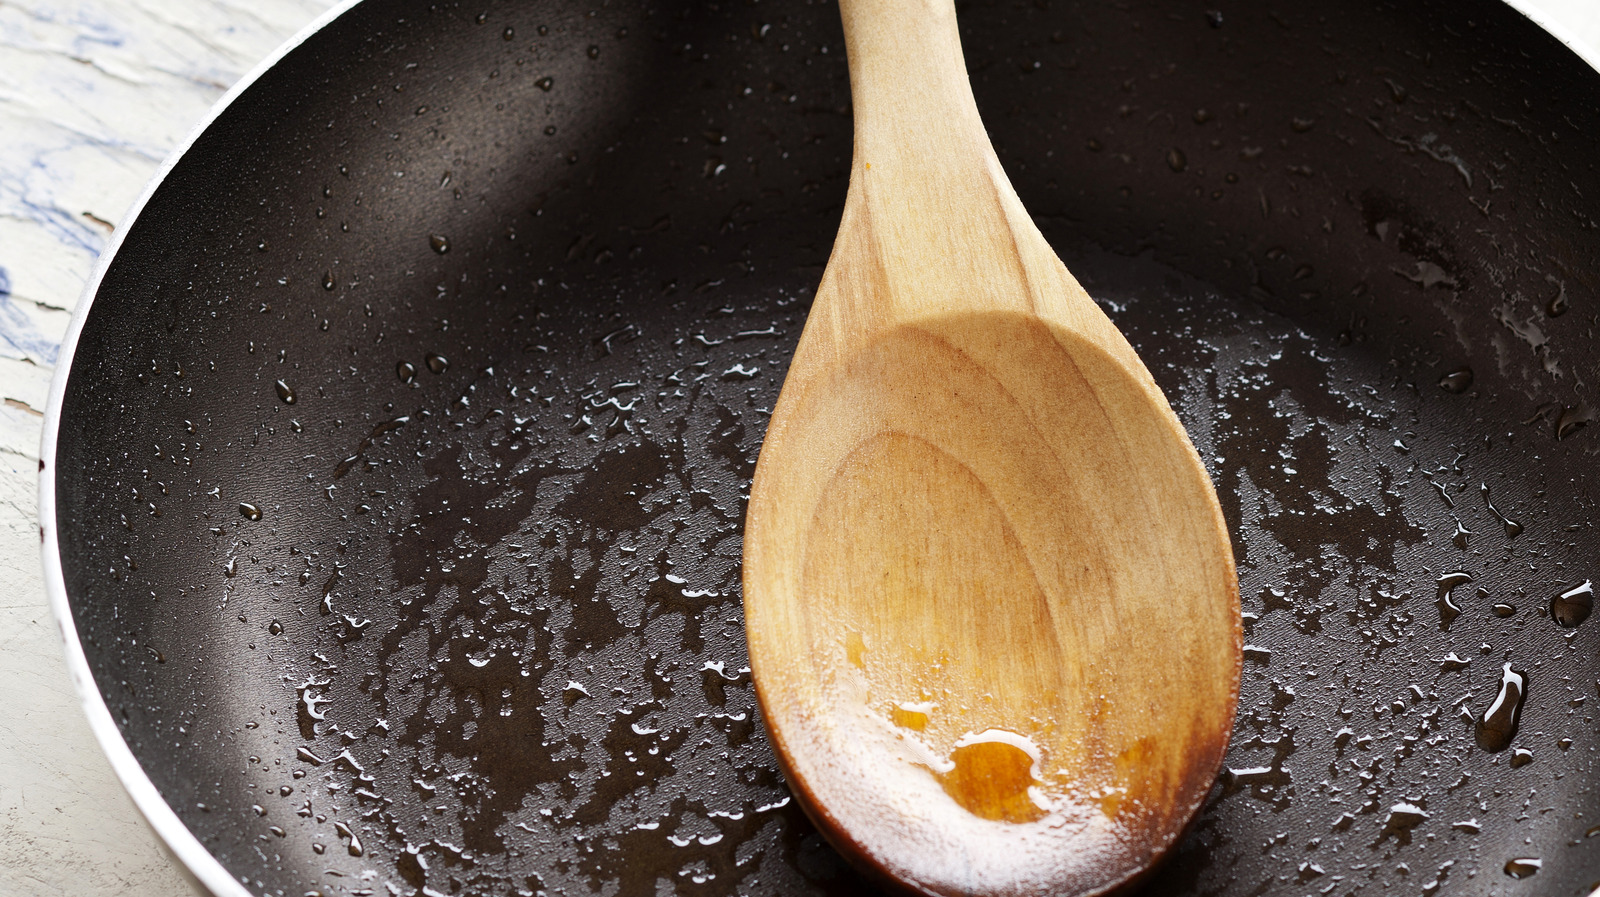 https://www.foodrepublic.com/img/gallery/how-to-clean-food-odors-out-of-wooden-spoons/l-intro-1694794538.jpg